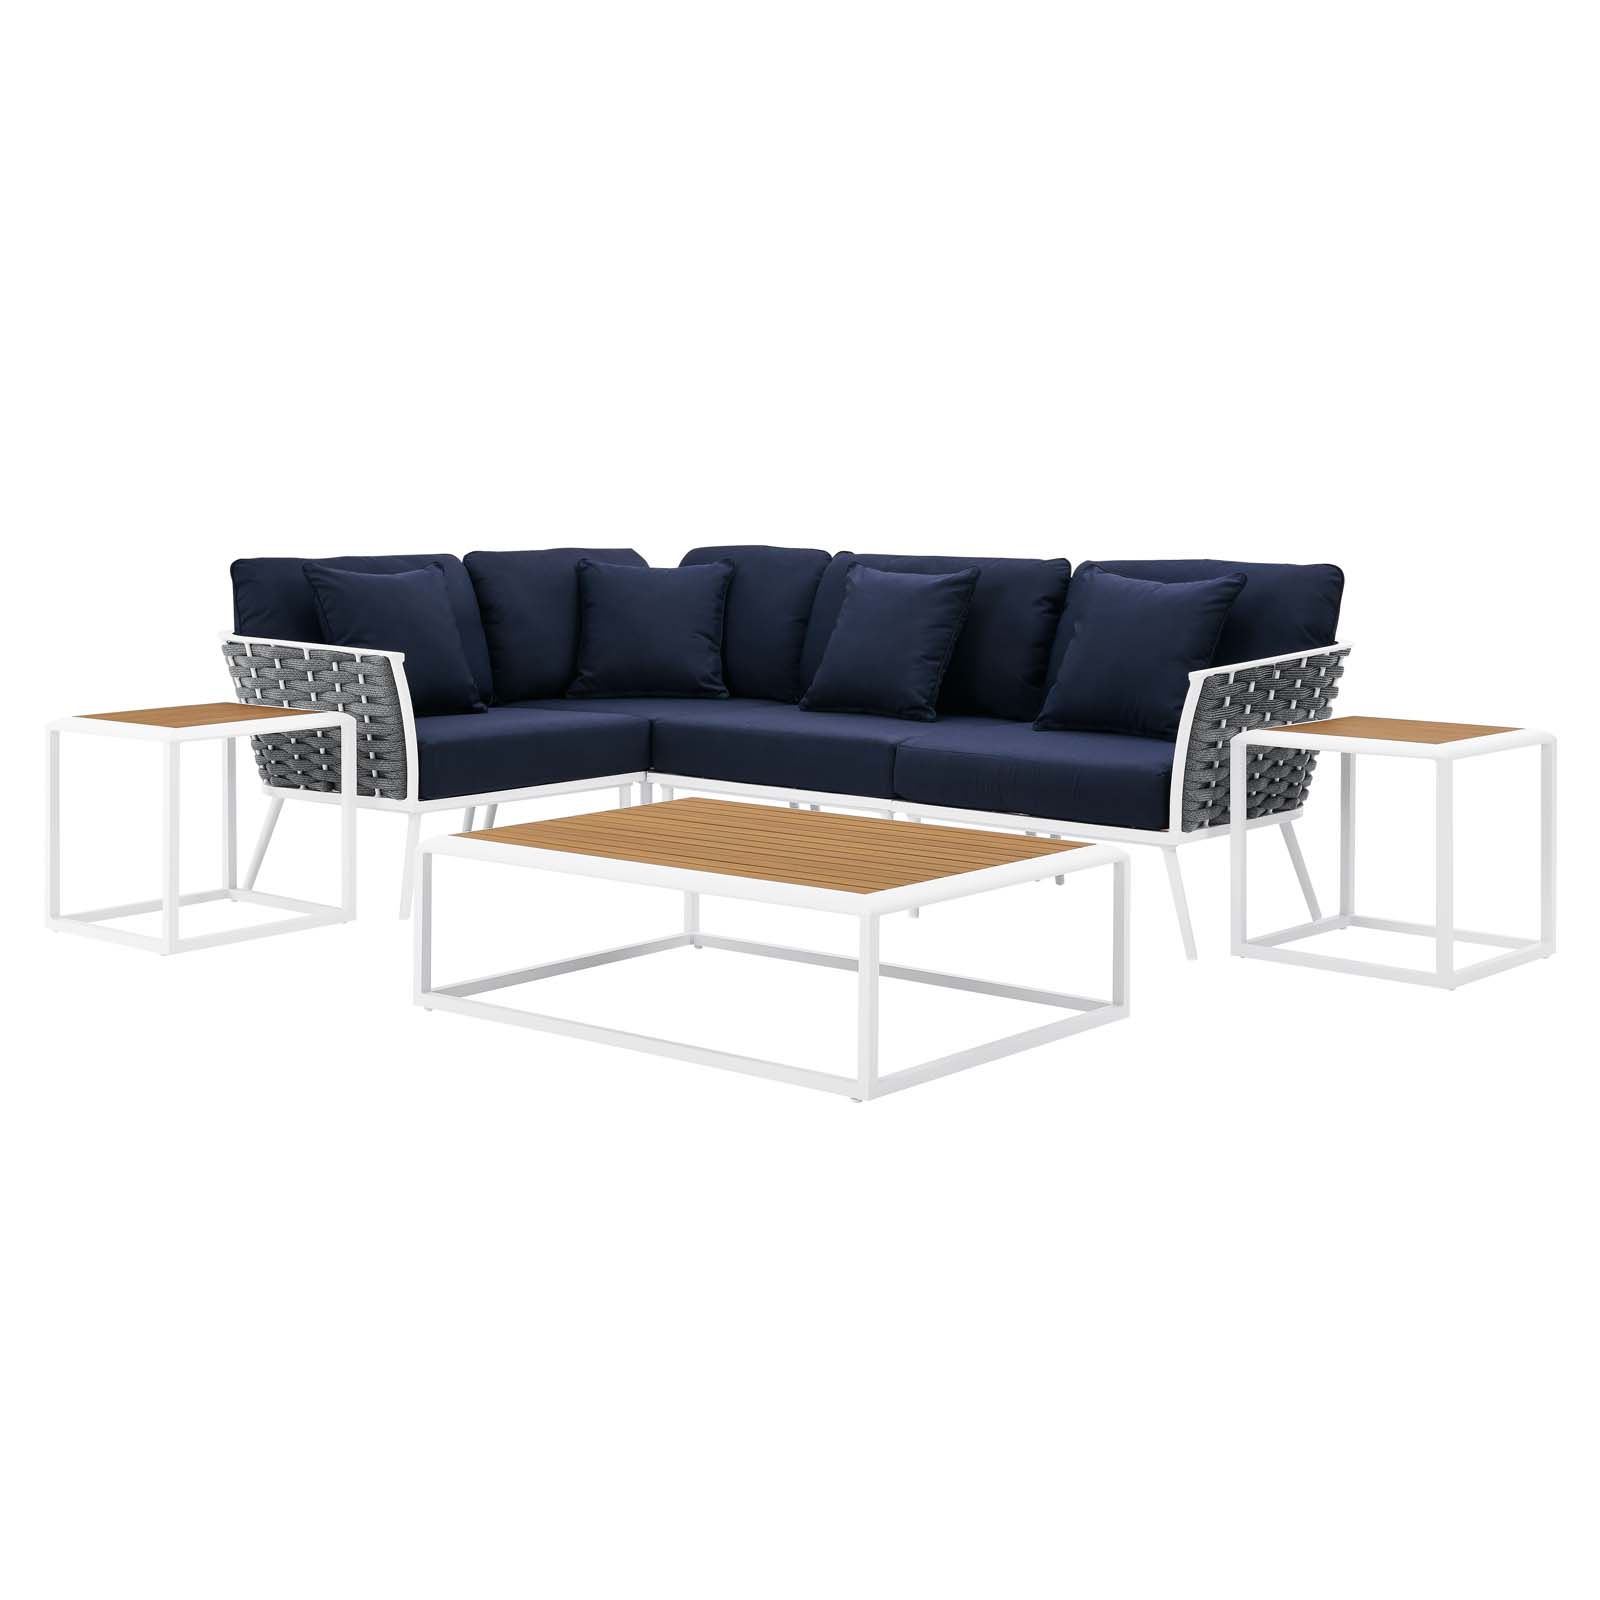 Lounge Sectional Sofa Chair Table Set, Navy White, Aluminum, Metal, Fabric, Modern Contemporary, Outdoor Patio Balcony Cafe Bistro Garden Furniture Hotel Hospitality - image 1 of 10